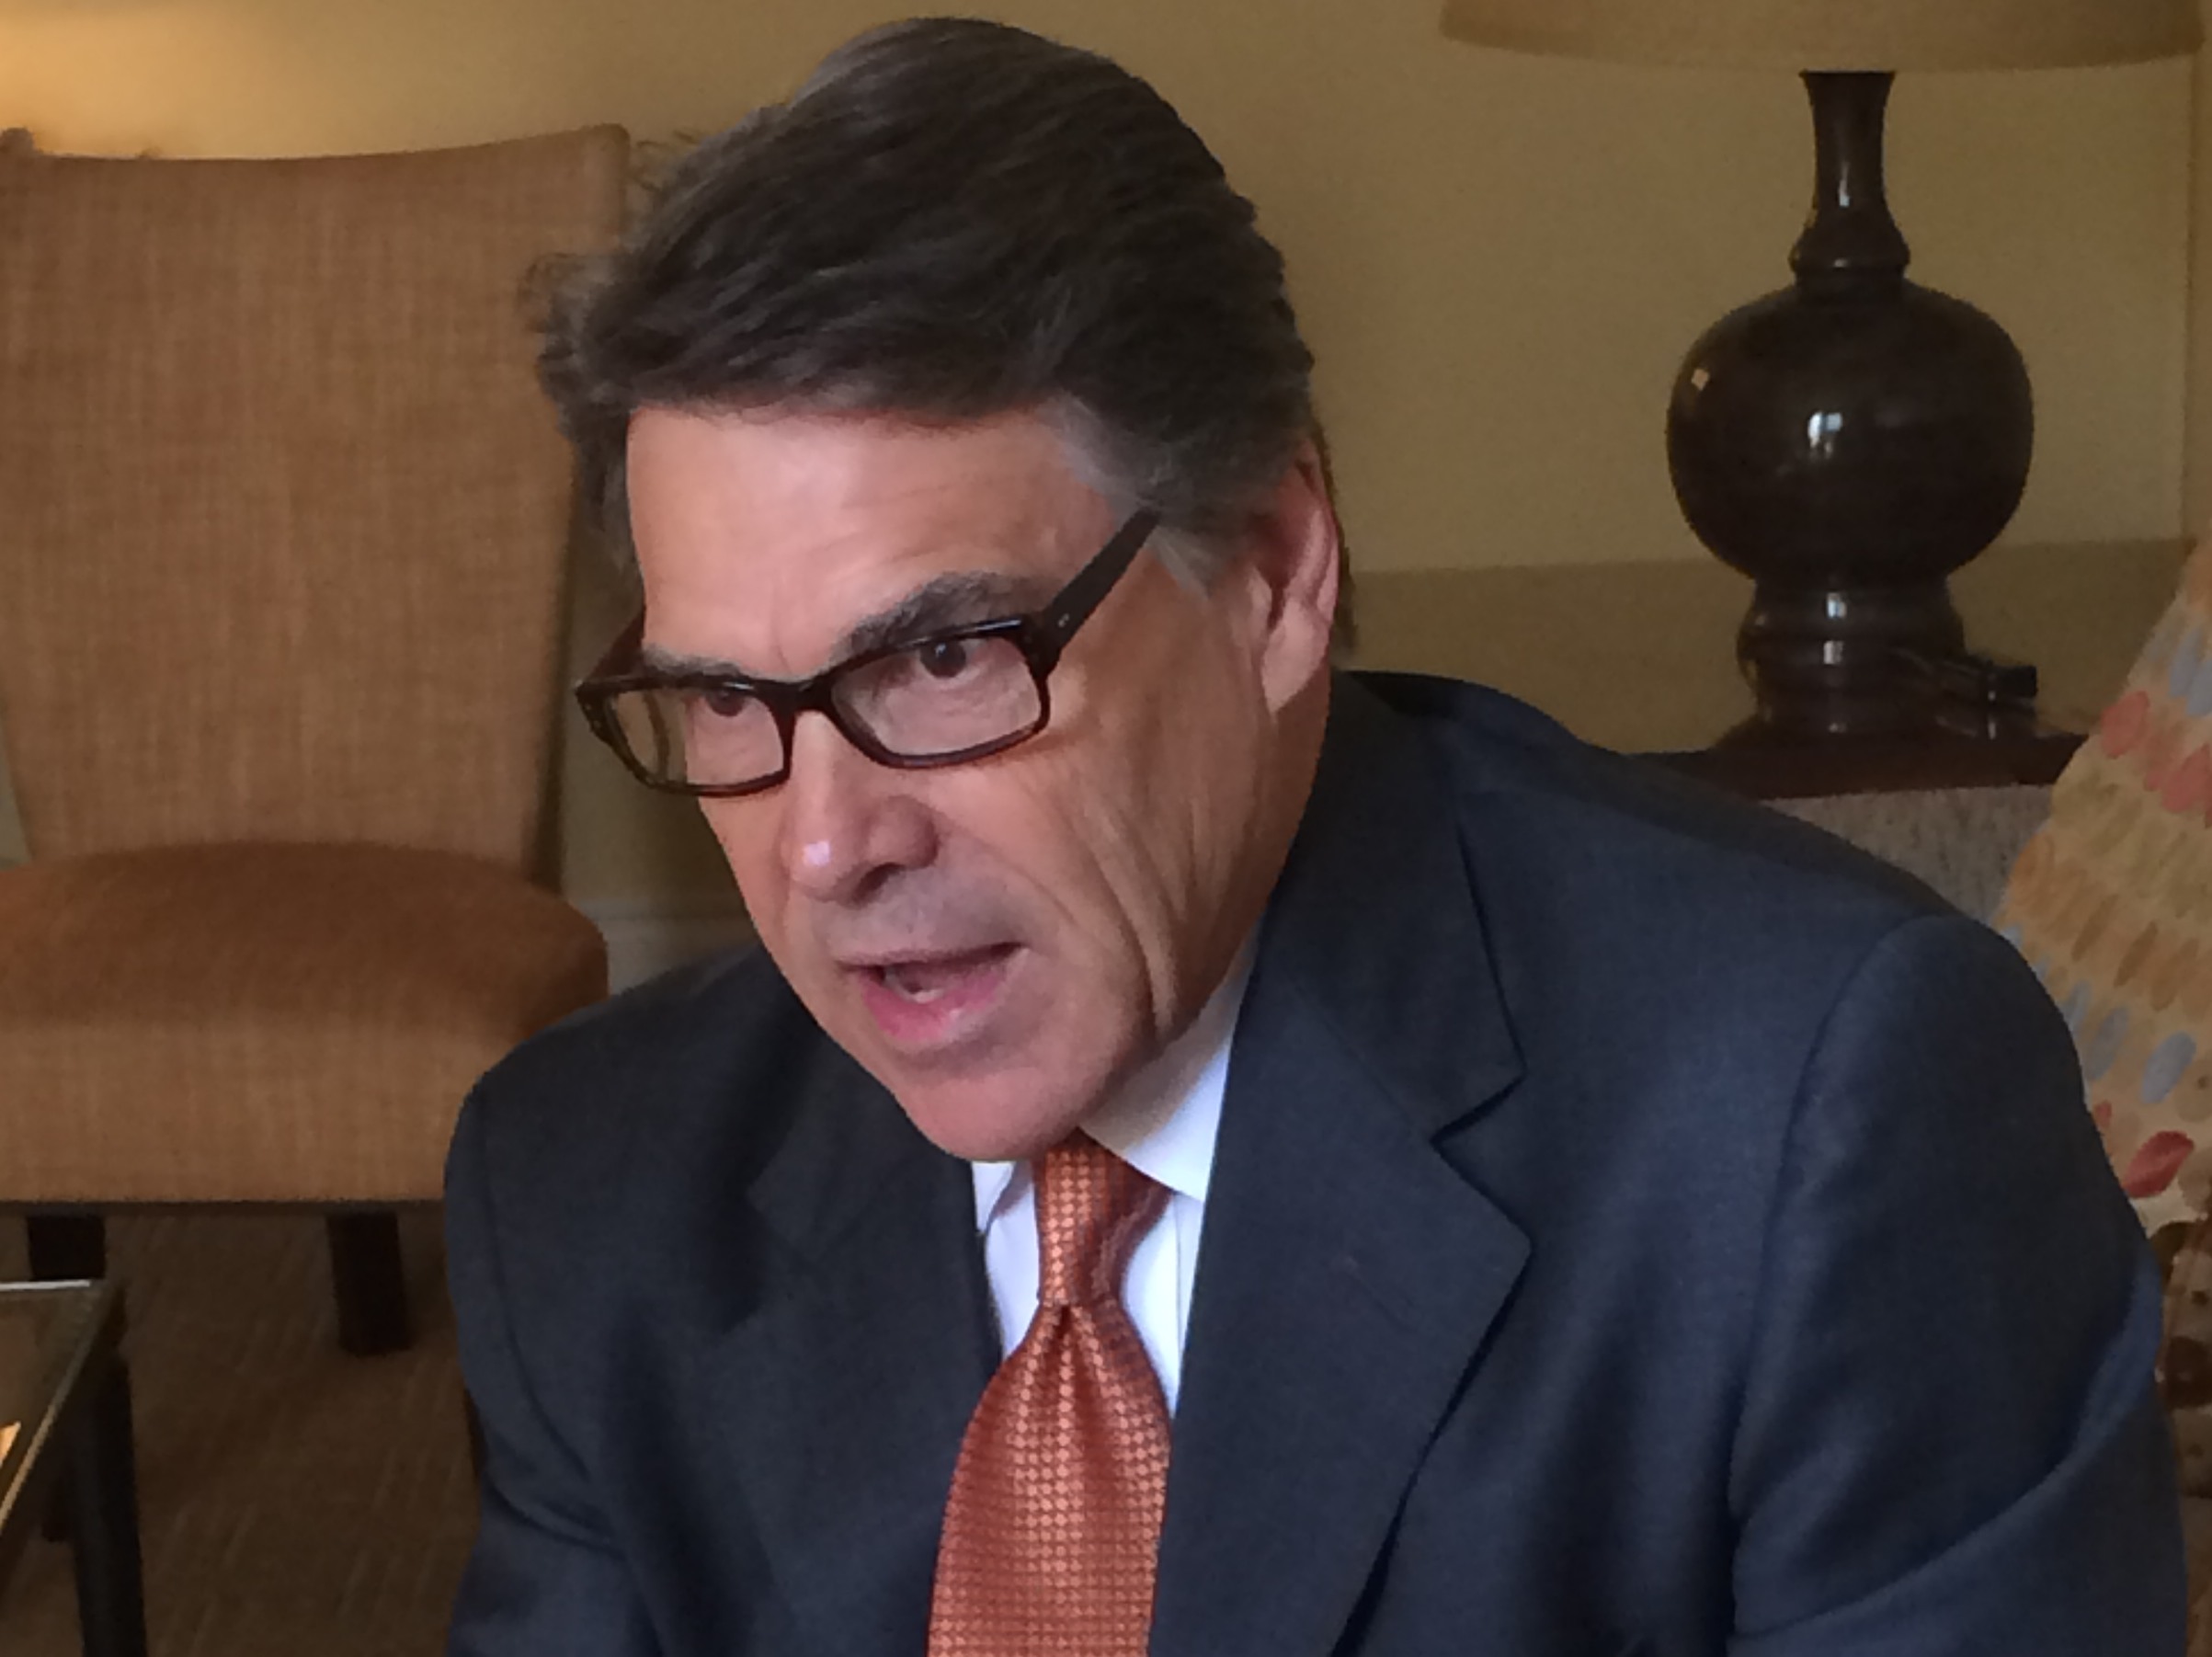 Dartmouth College Student Asks Rick Perry Explicit Question at Public Event